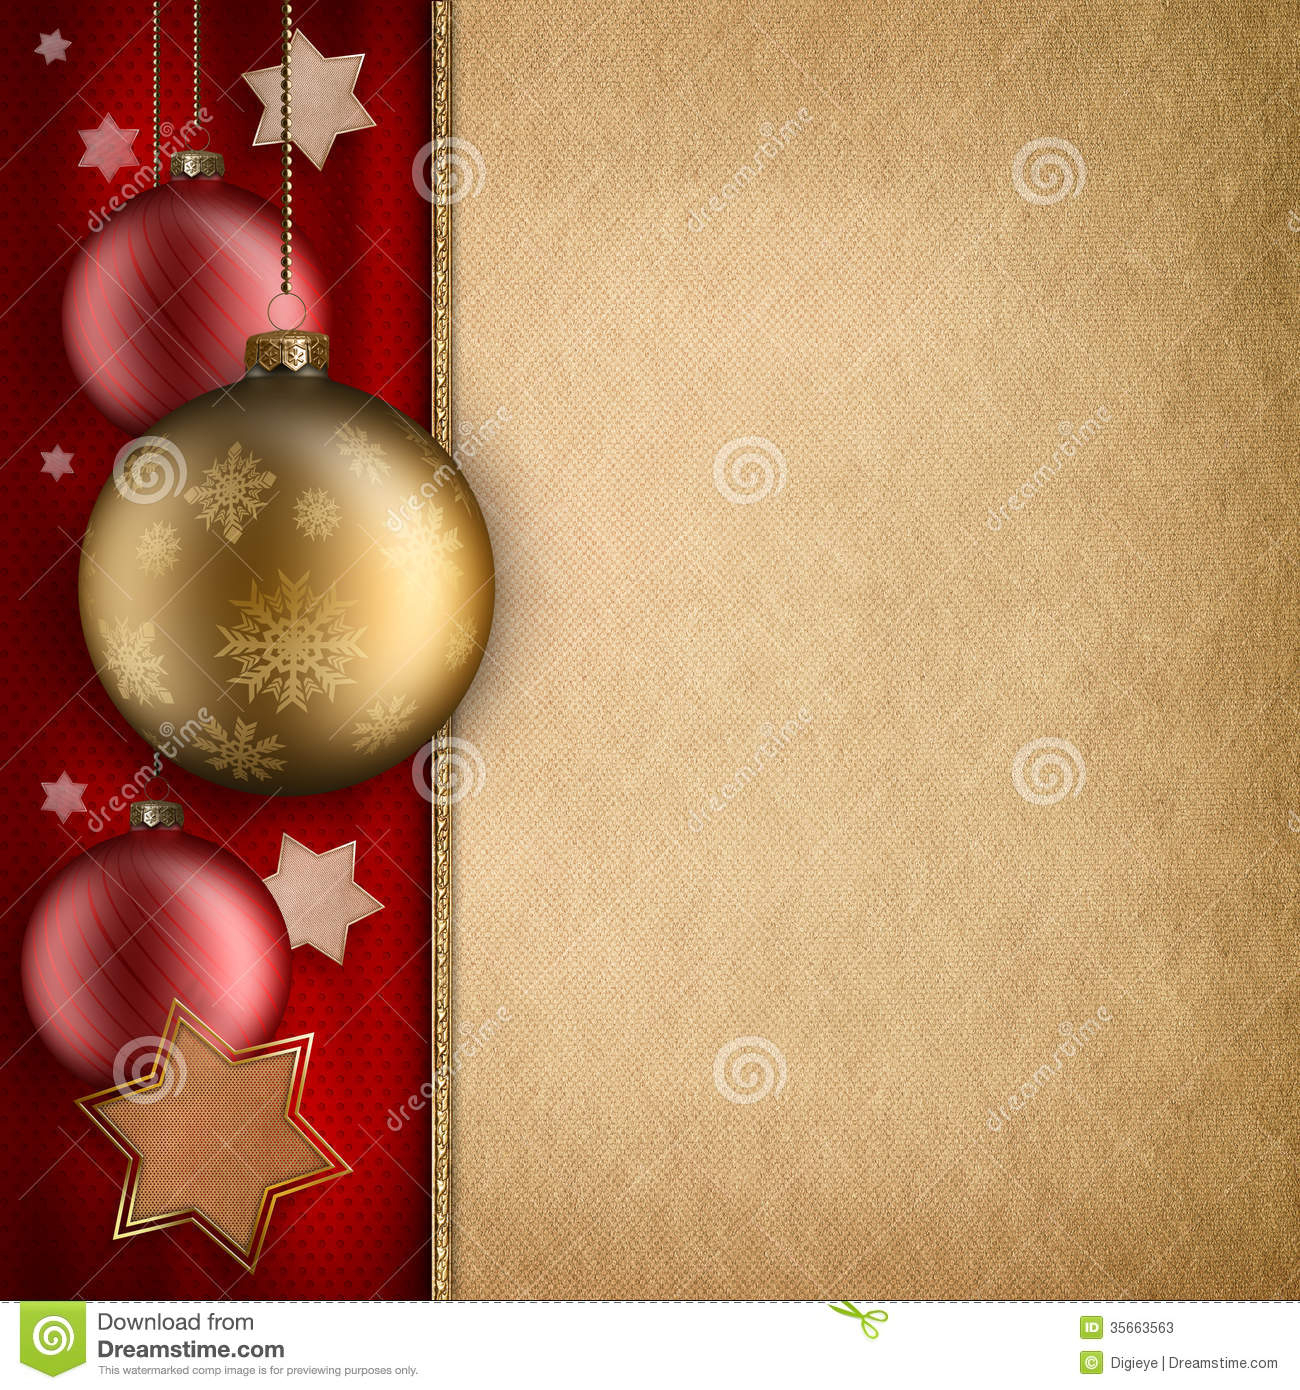 Blank Christmas Menu Templates – Www.toib.tk With Christmas Photo Cards Templates Free Downloads